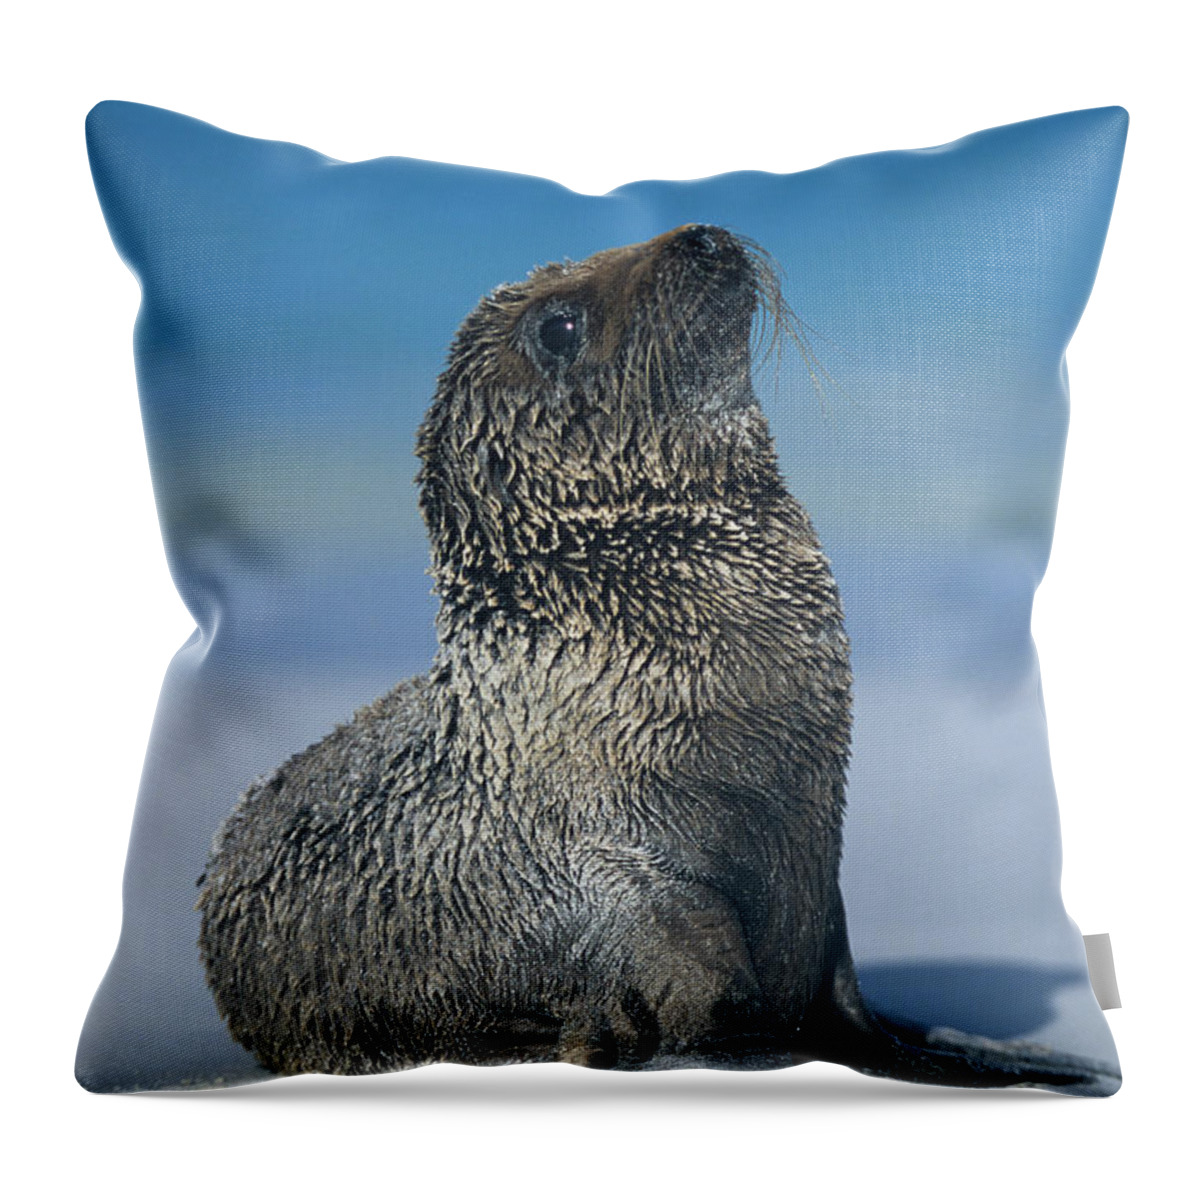 Sea Lion Throw Pillow featuring the photograph Galapagos Sea Lion by Chris Scroggins